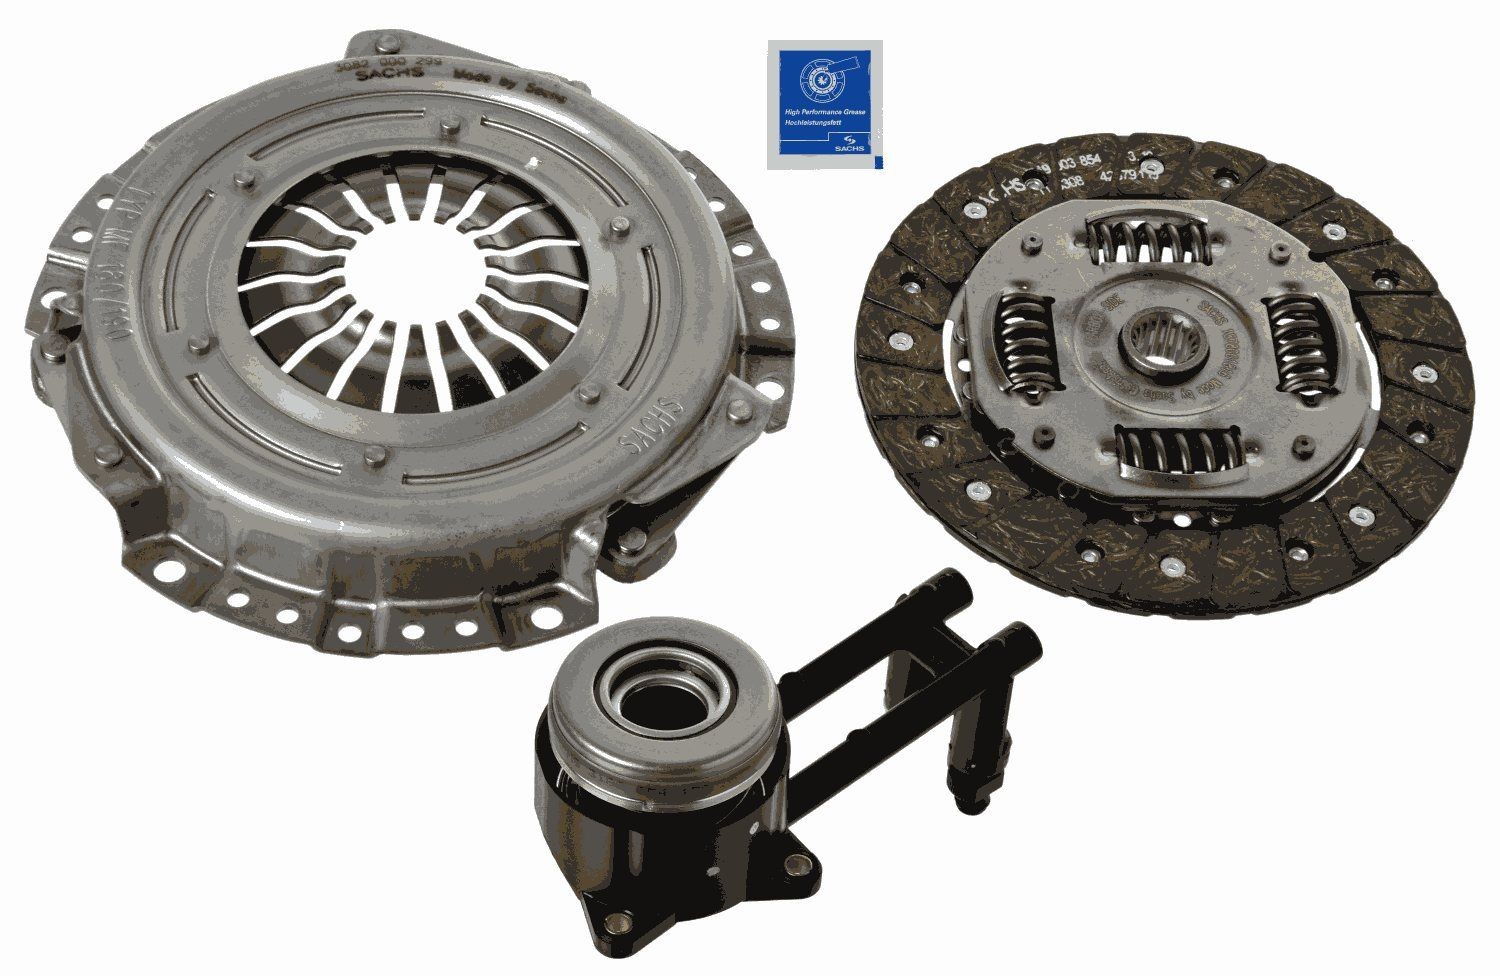 SACHS Clutch replacement kit Ford Fiesta Mk5 new 3000 990 085